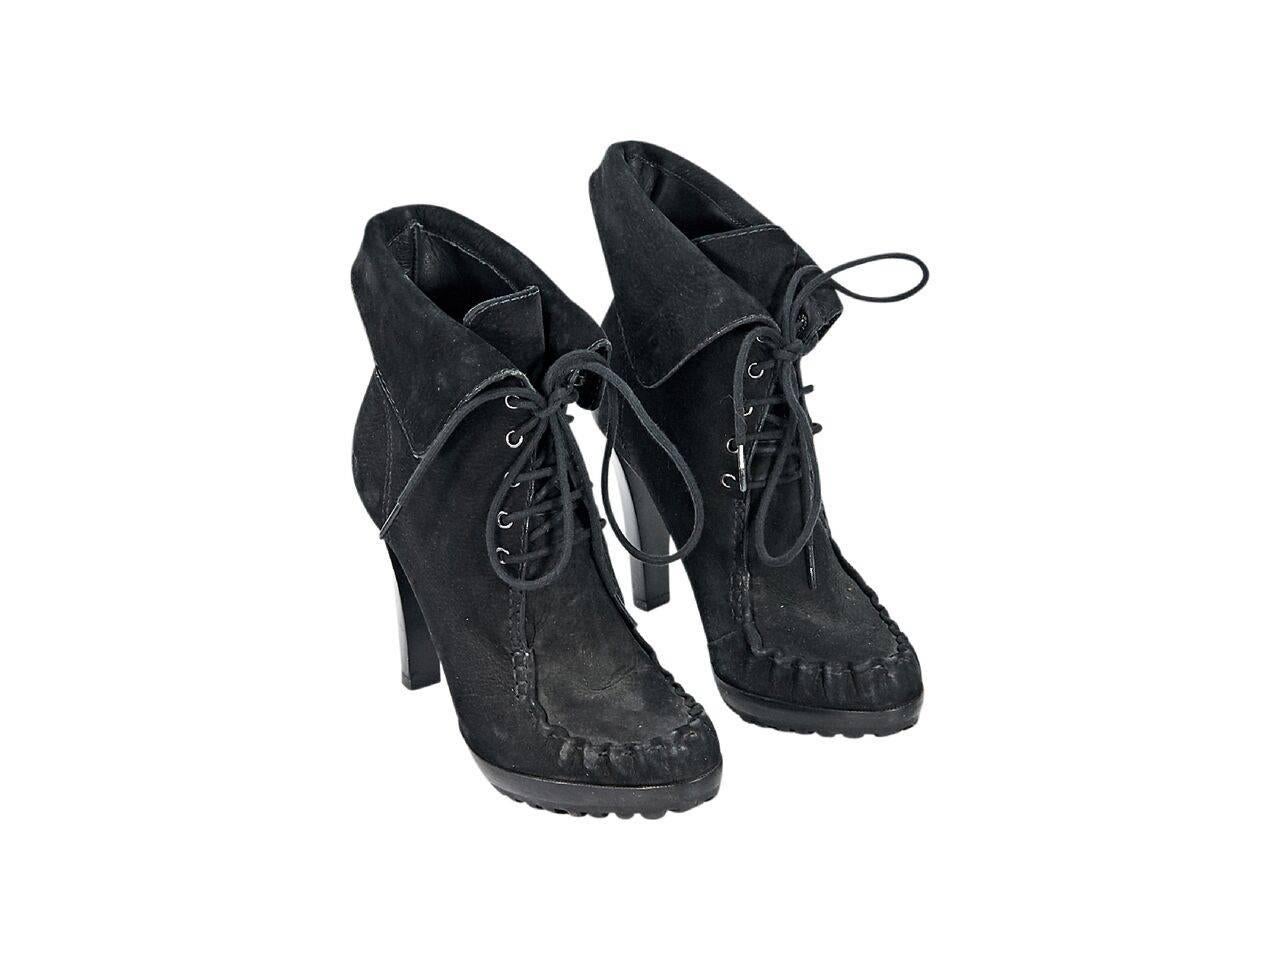 Product details:  Black oiled suede ankle boots by Diane von Furstenberg.  Lace-up closure.  Round moc toe.  Stacked heel and platform design. 
Condition: Pre-owned. Very good.
Est. Retail $ 598.00